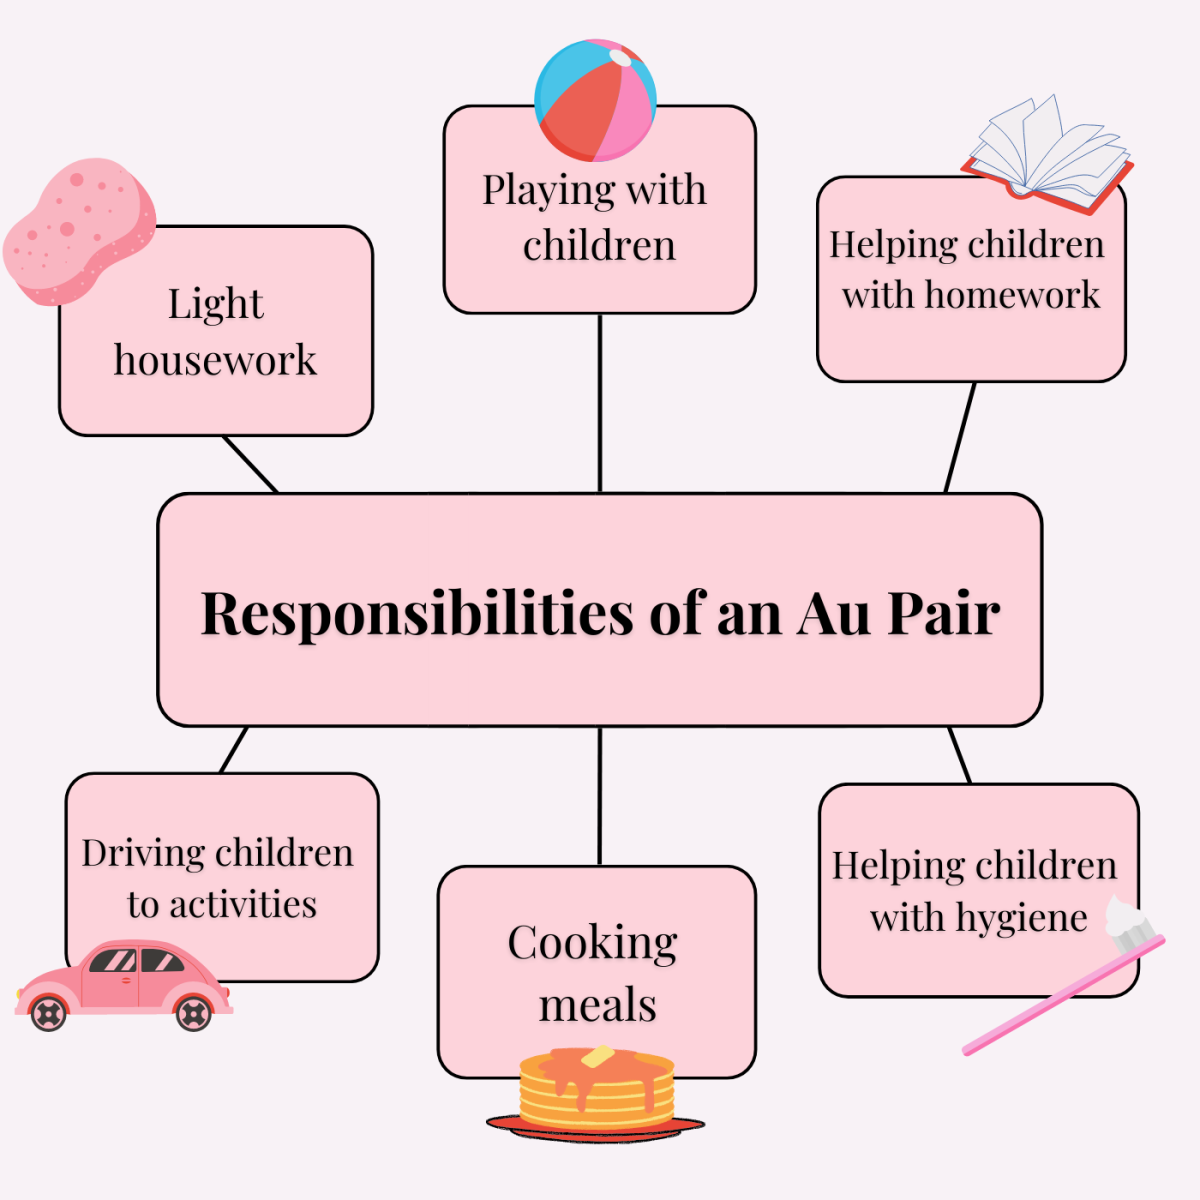 Here are some of the more specific duties of an au pair